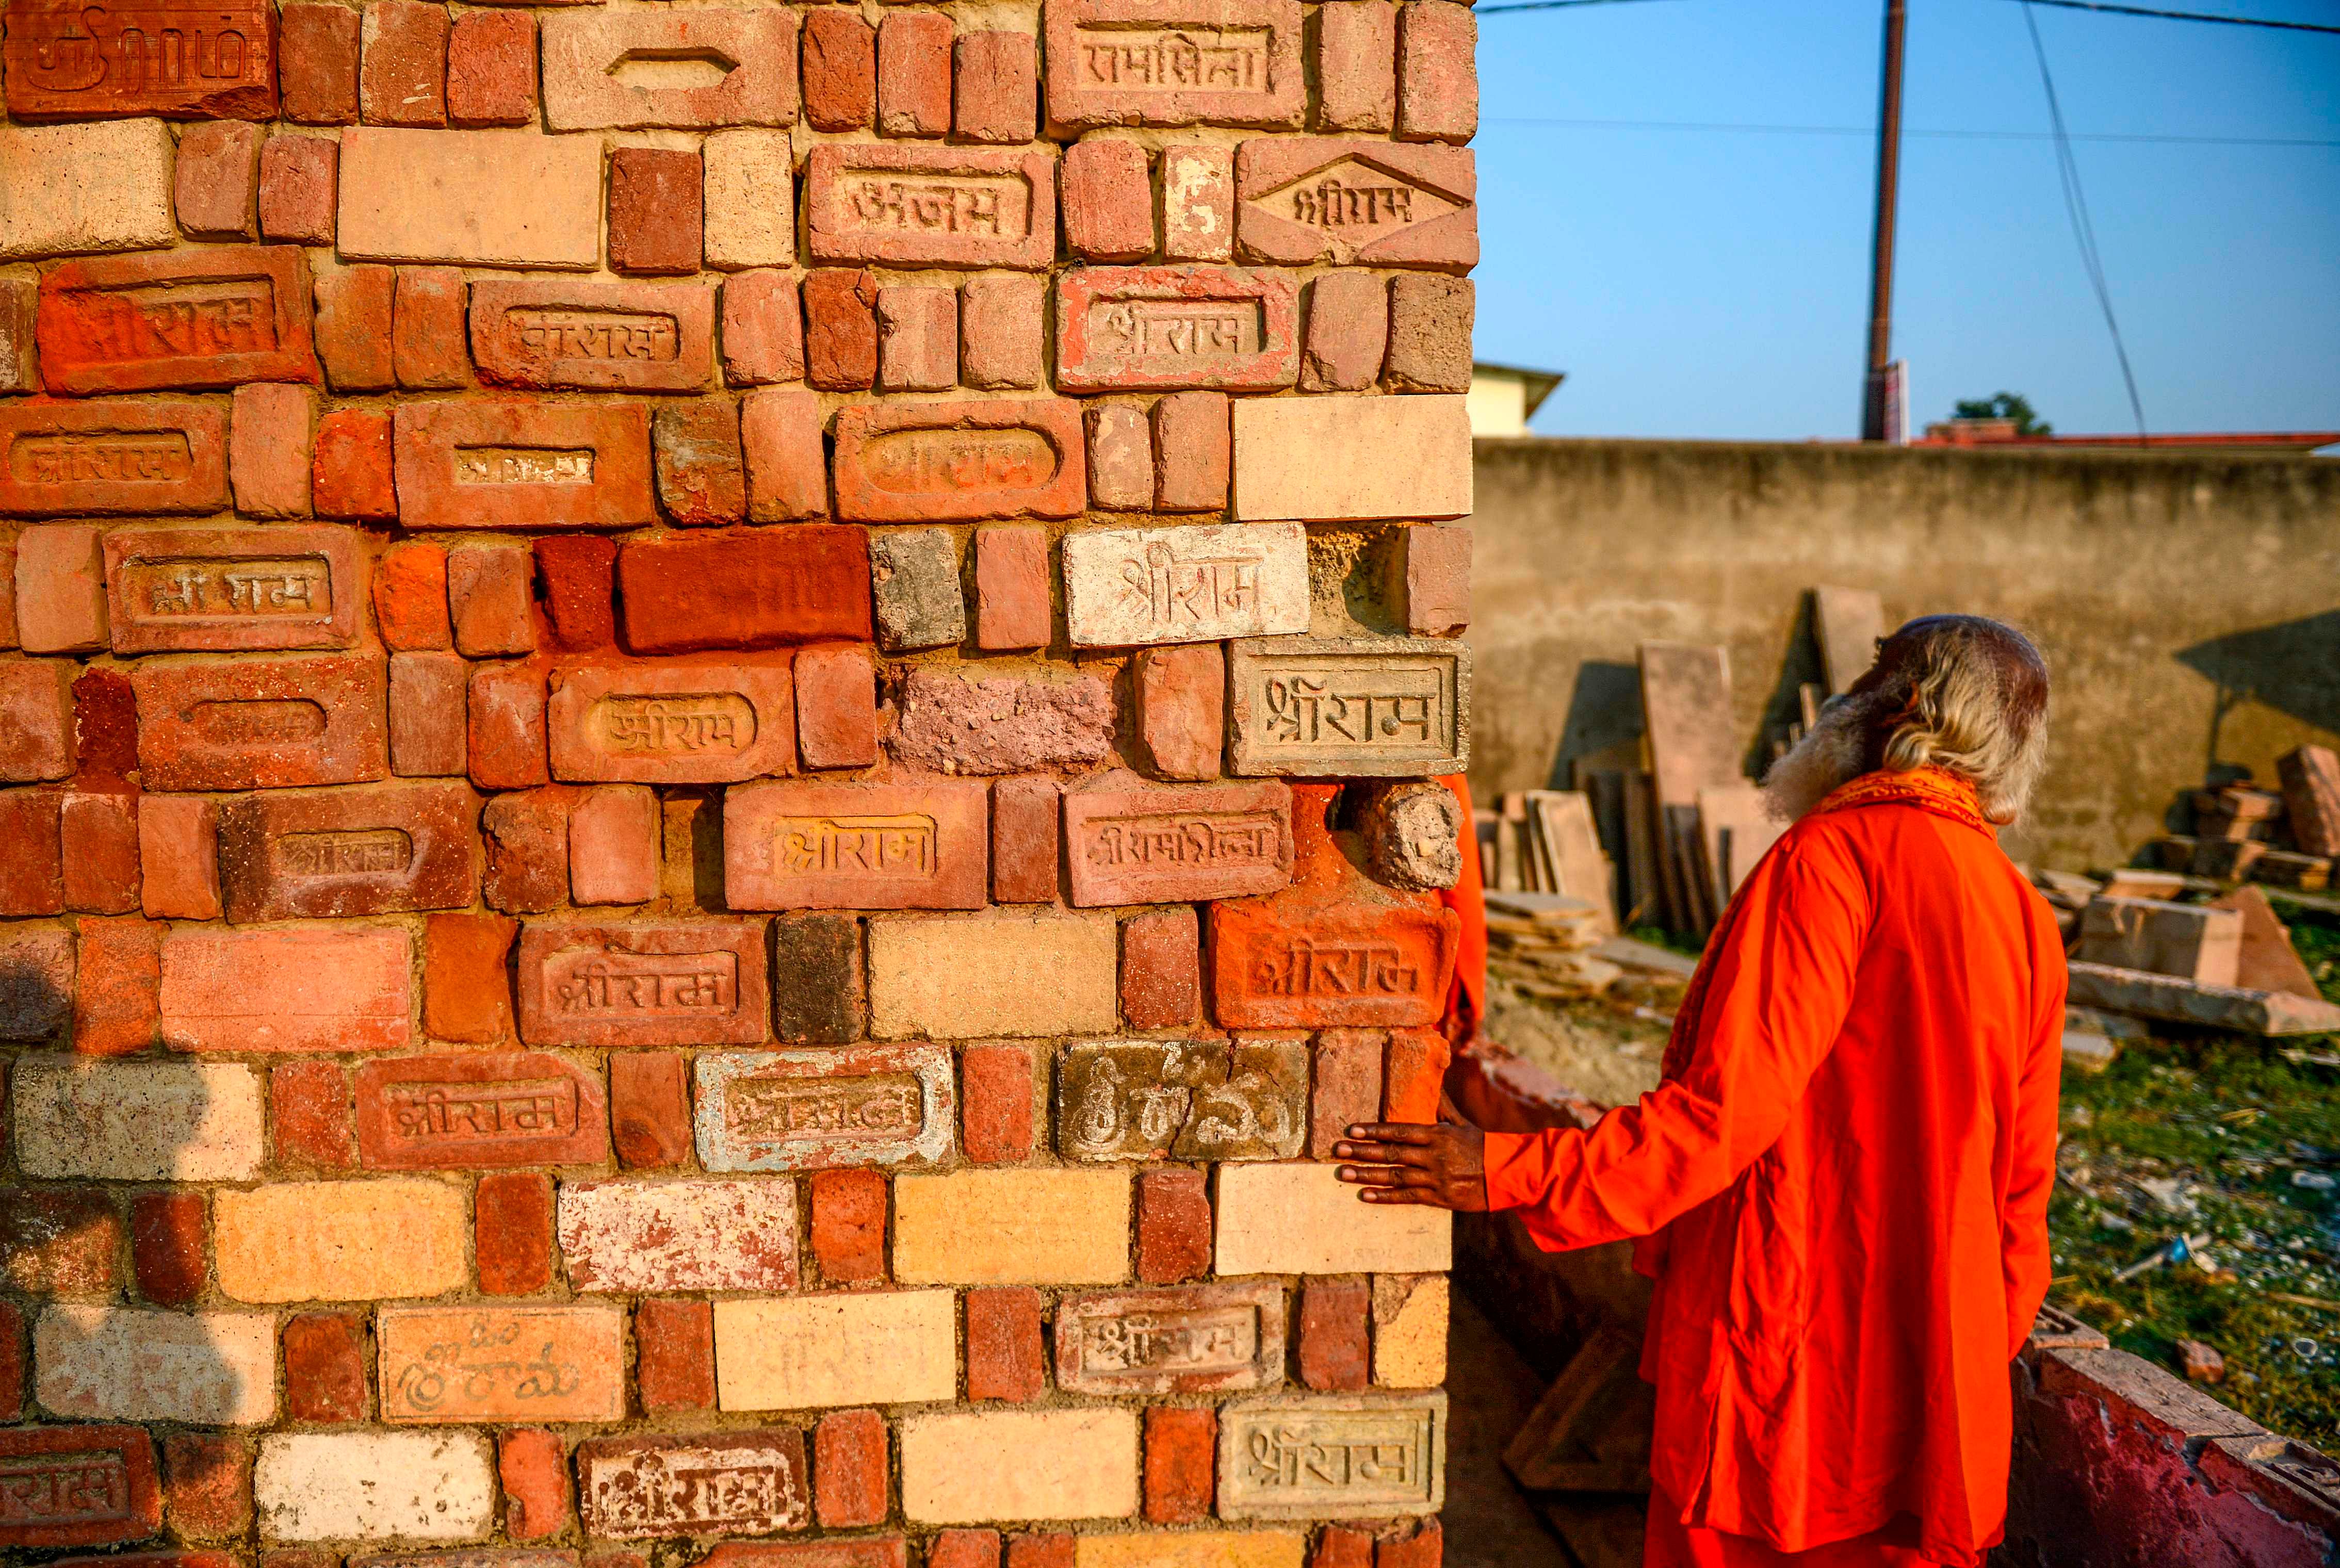 In this picture taken on November 12, 2019, a Sadhu (Hindu holy man) looks at bricks for the proposed Rama temple Ram Janmabhoomi Nyas workshop in Ayodhya, after the Supreme Court verdict on the disputed religious site. (AFP photo)